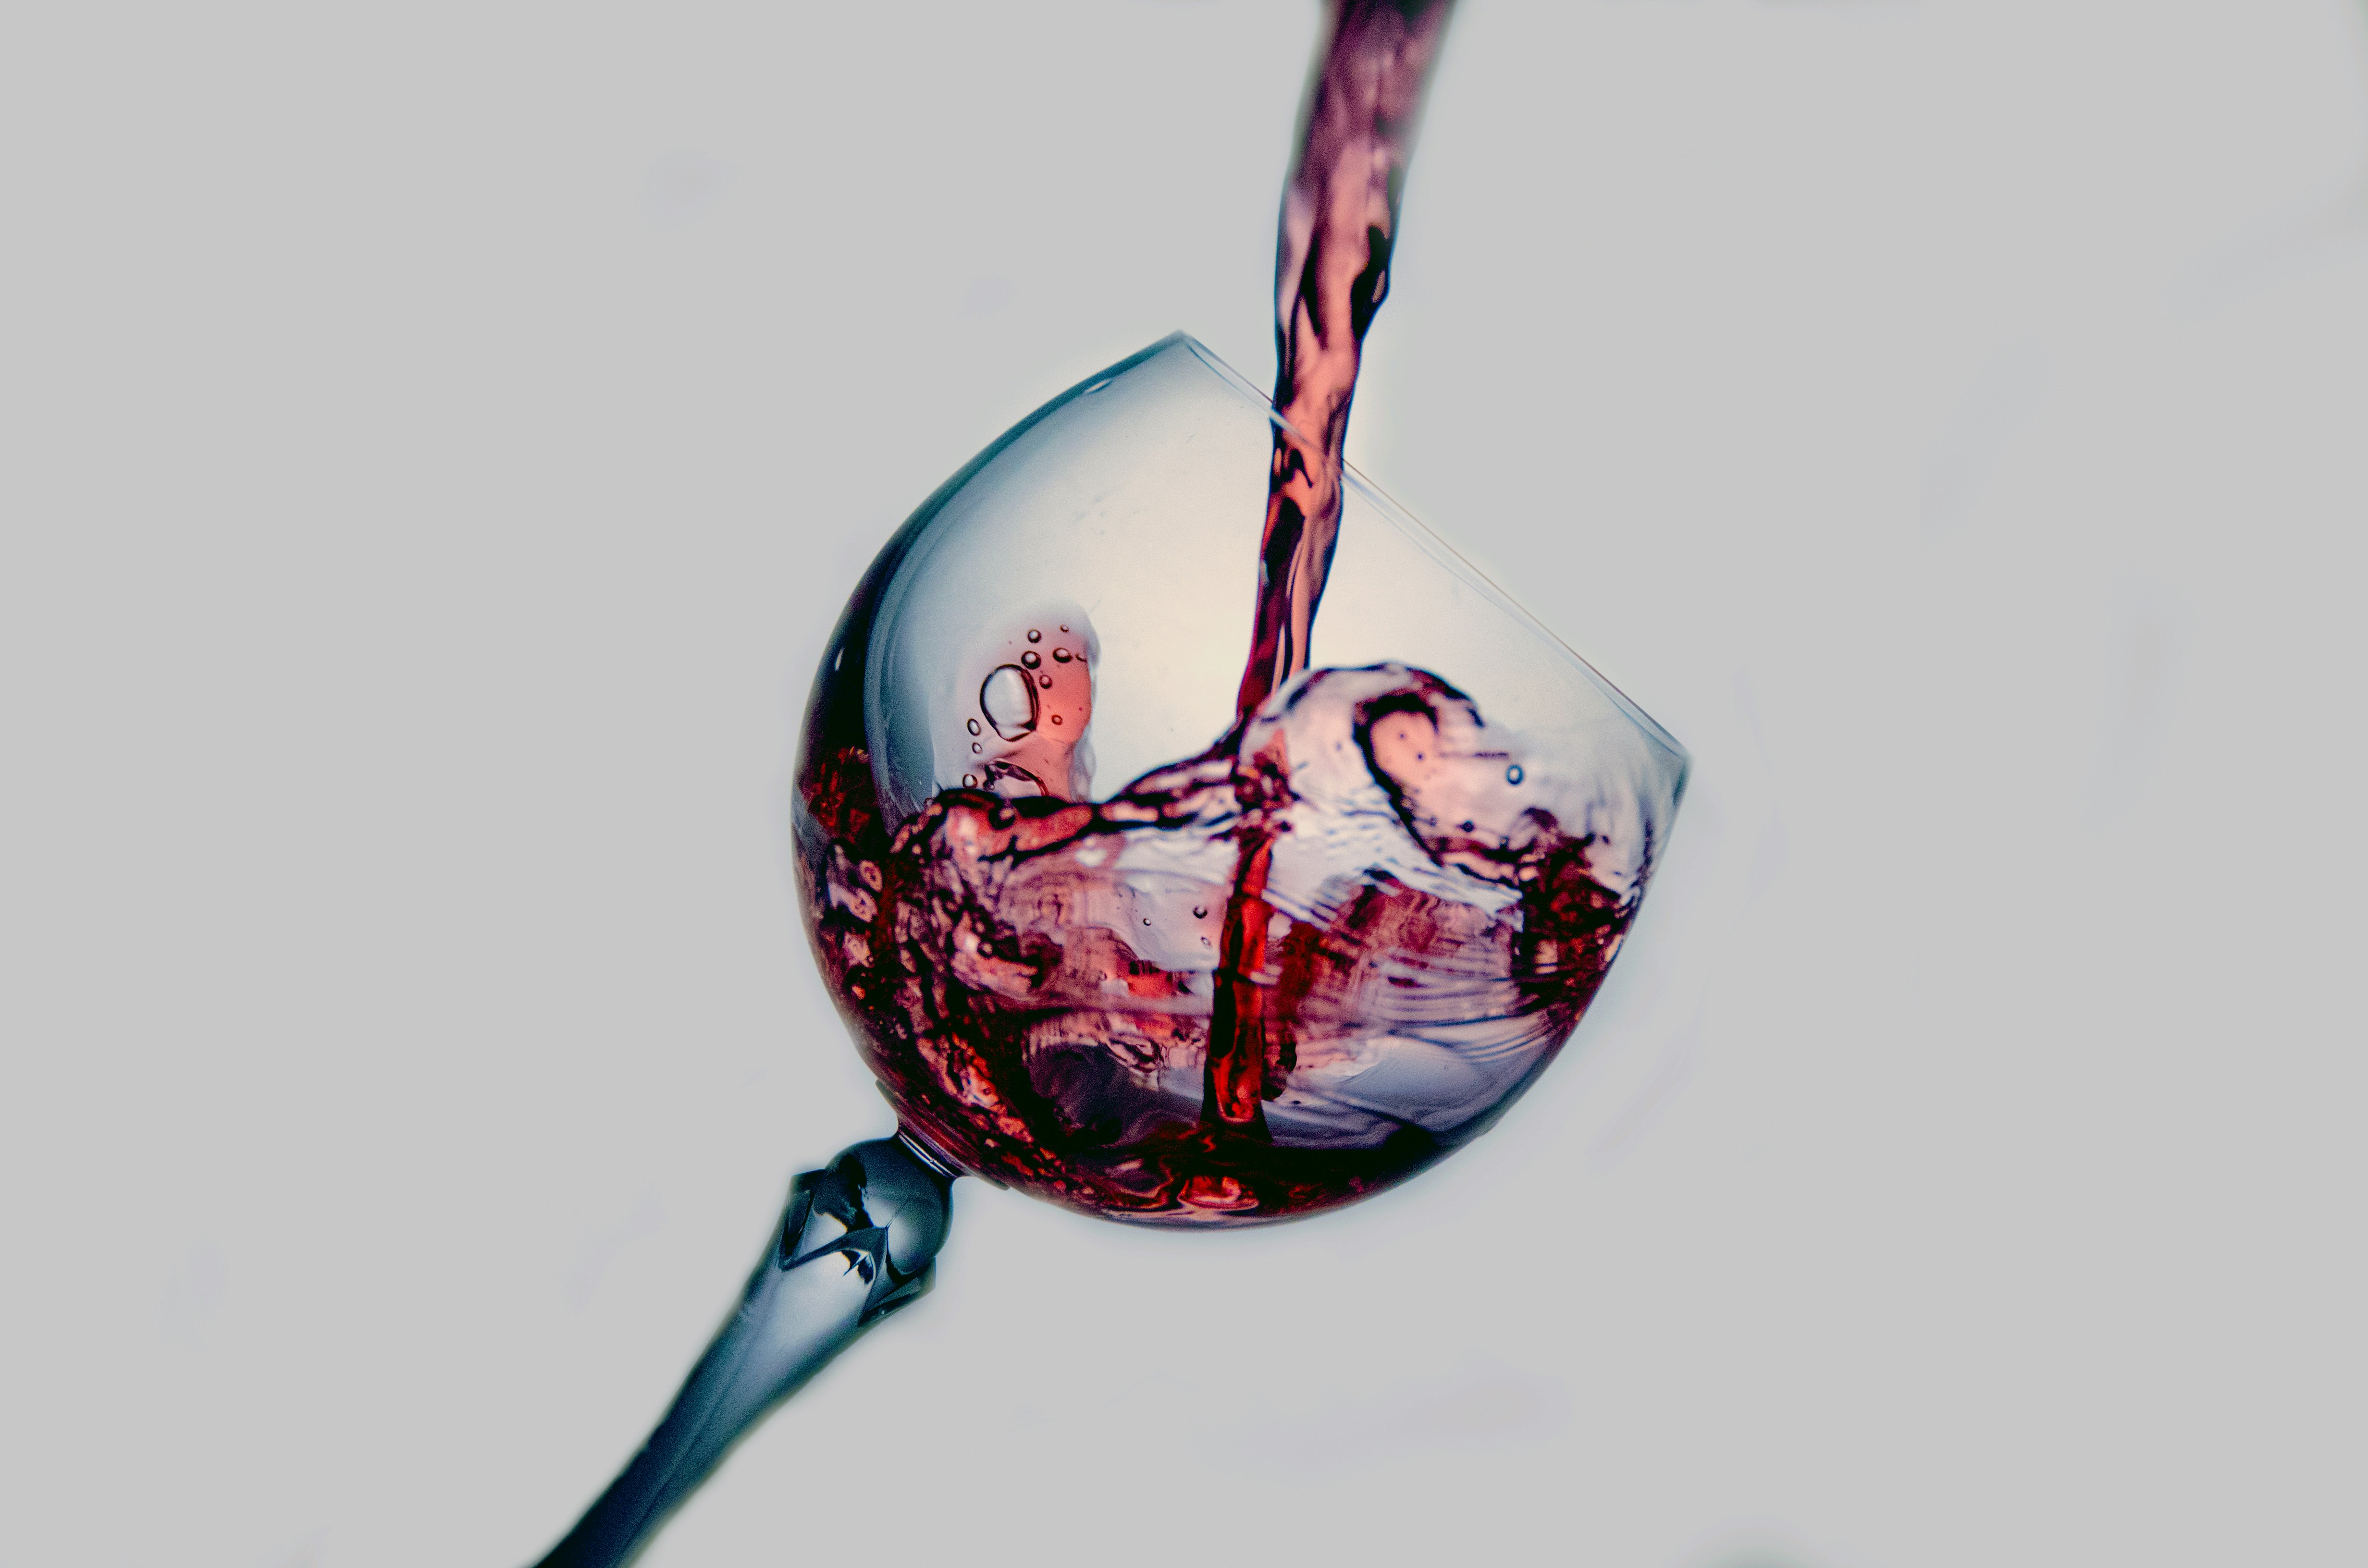 Wine glass tilted on angle; red wine pours into the glass from above.